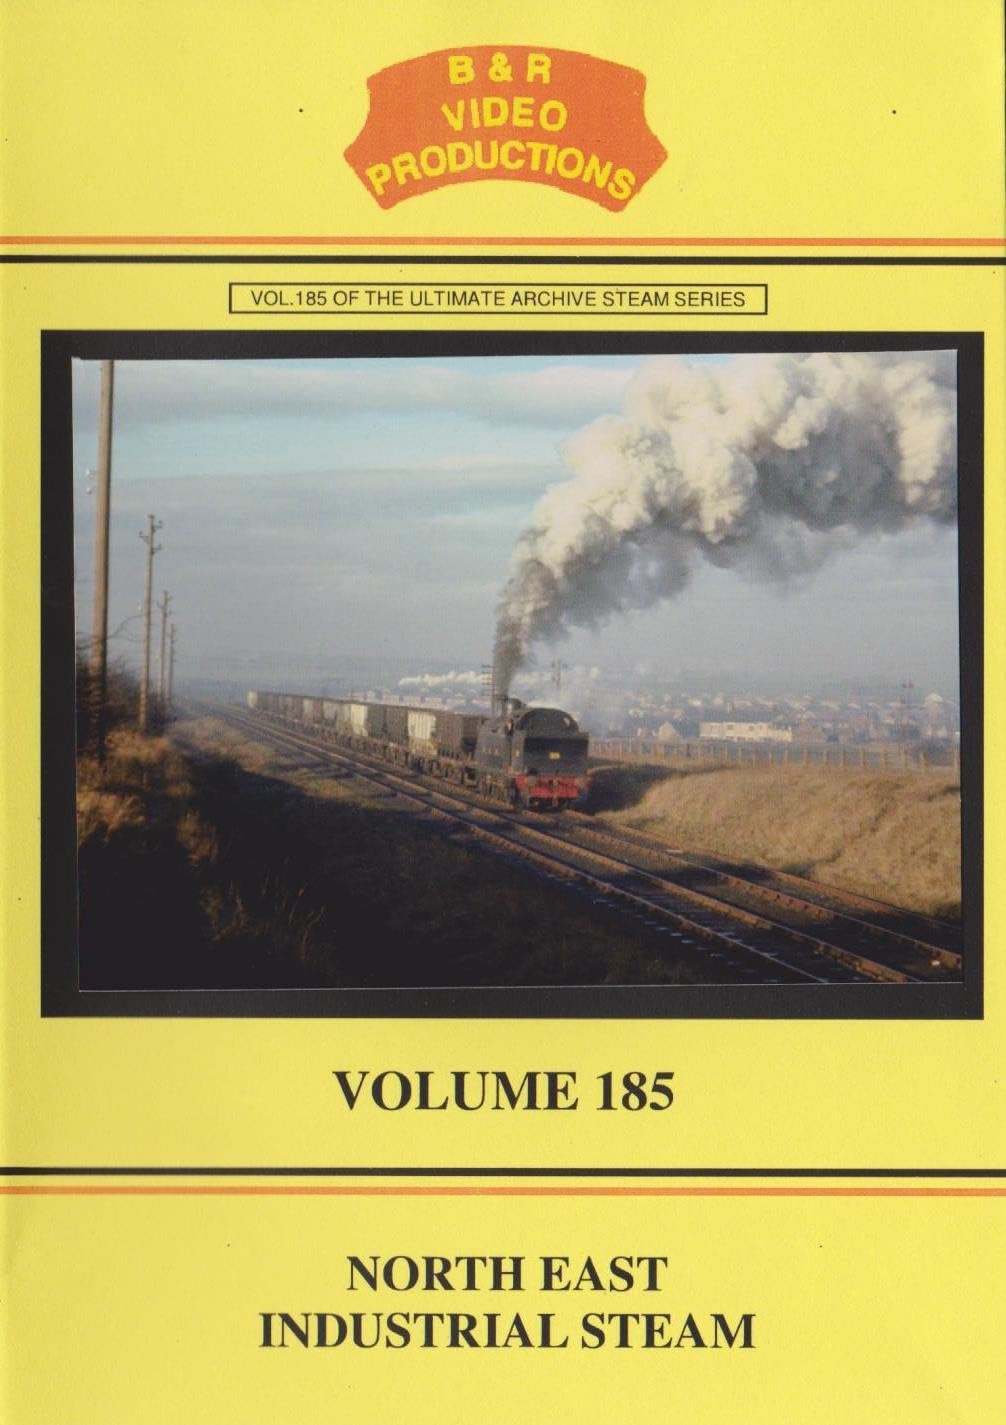 B & R Video Productions Vol 185 - North East industrial steam 